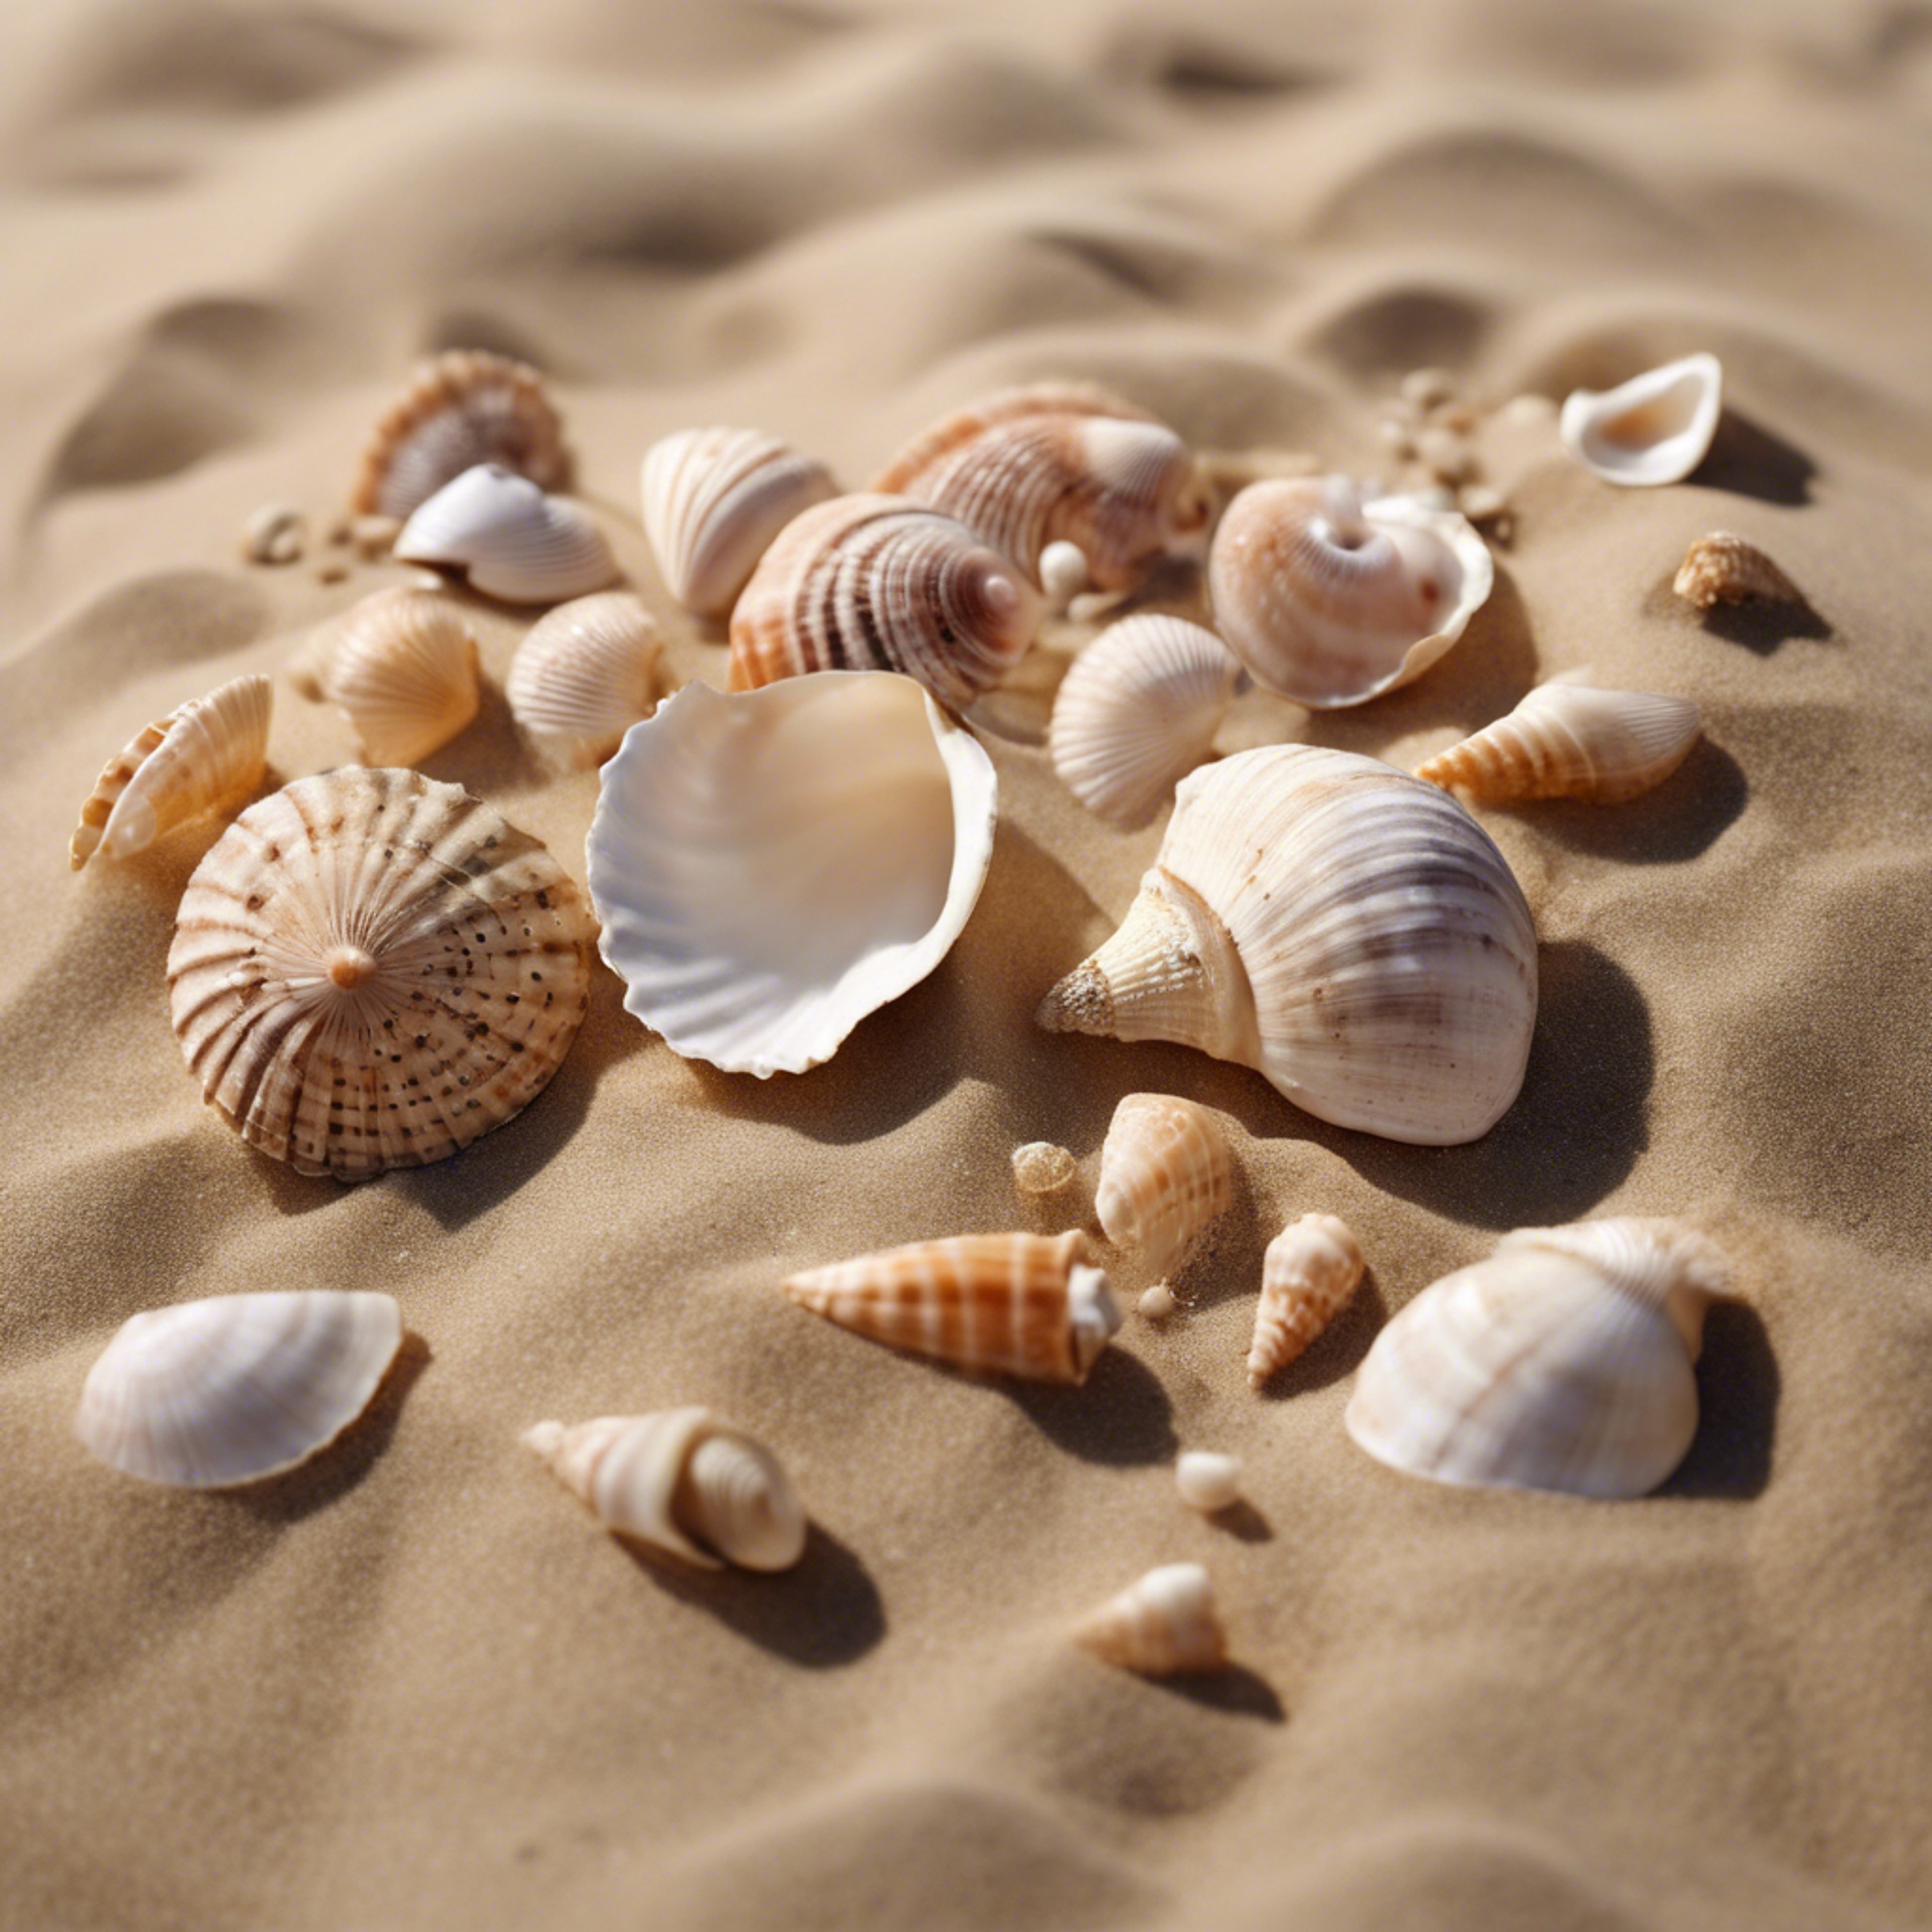 An arrangement of seashells of various sizes in a cool beige sand. Tapet[d4509fc1f43d45f6bba6]